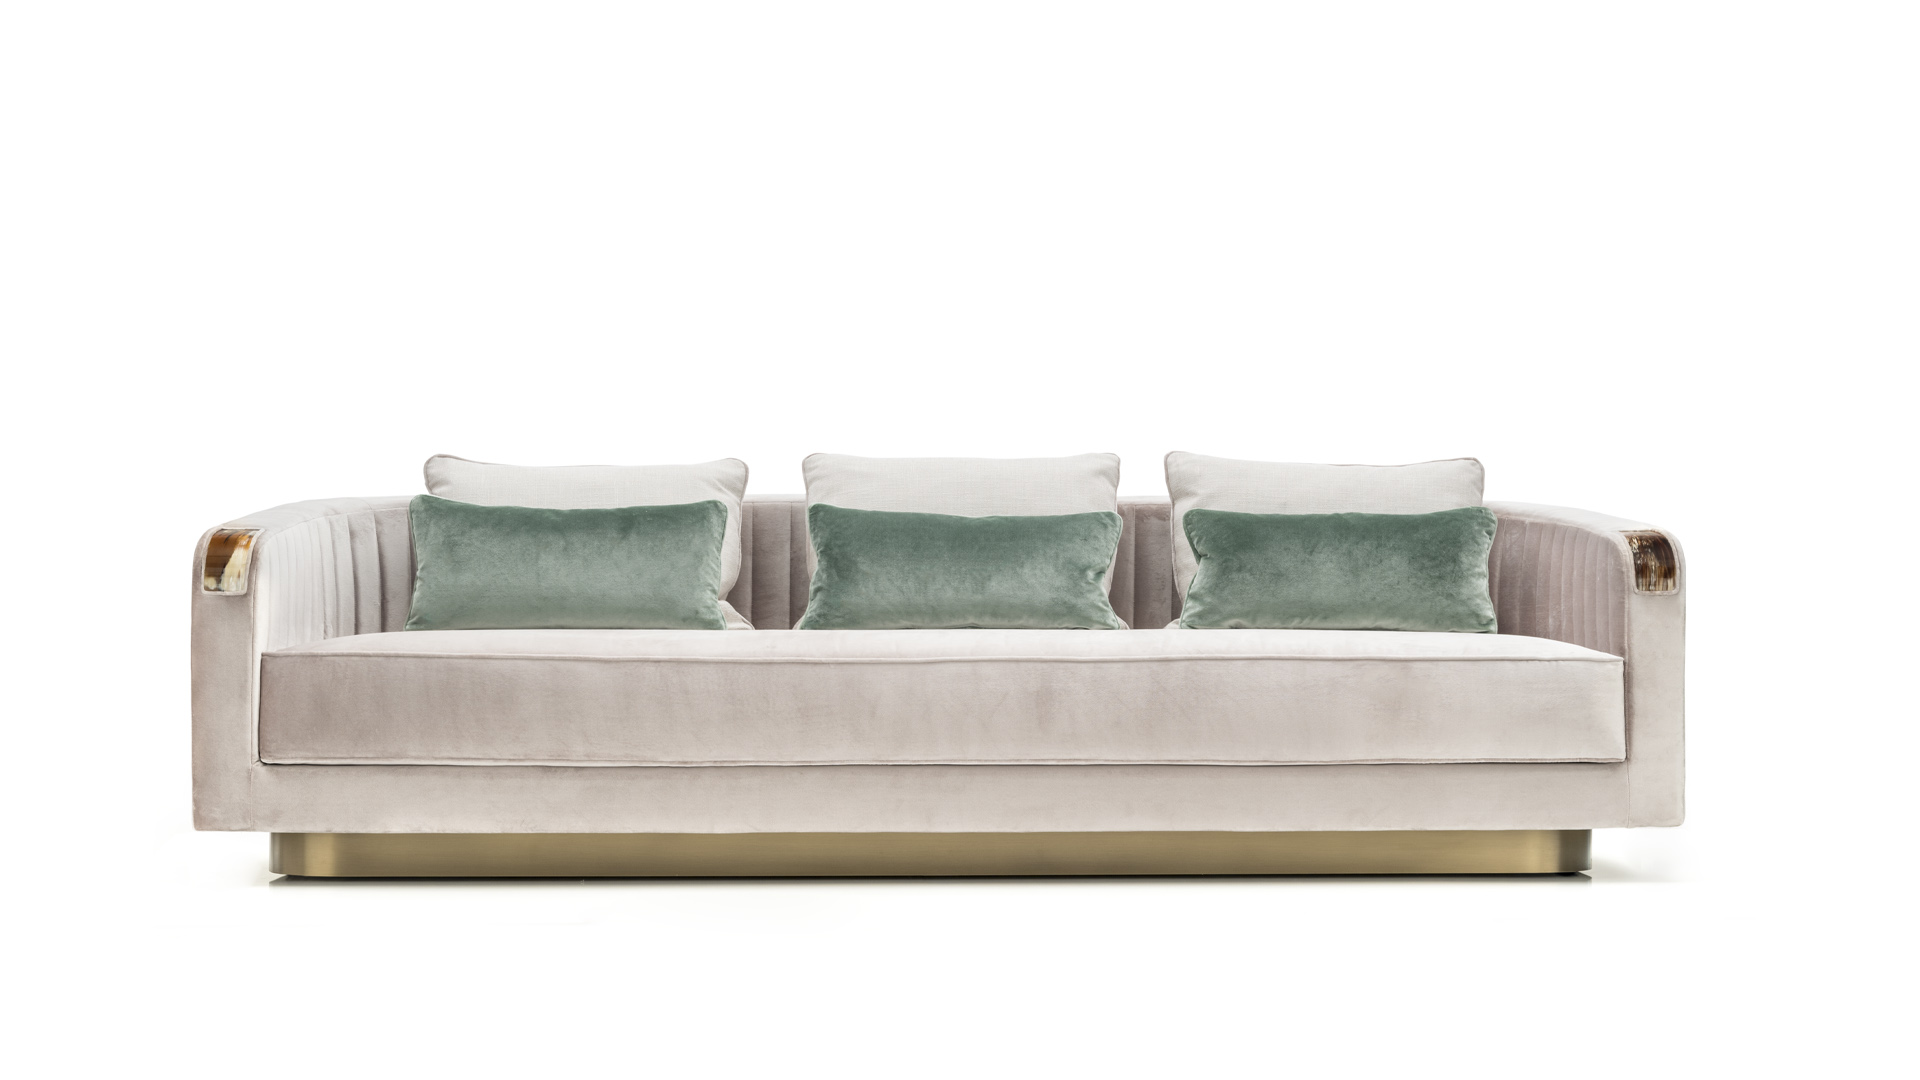 Sofas and seats - Rea sofa in Splendido velvet with horn armrests mod. 7020A - cover - Arcahorn